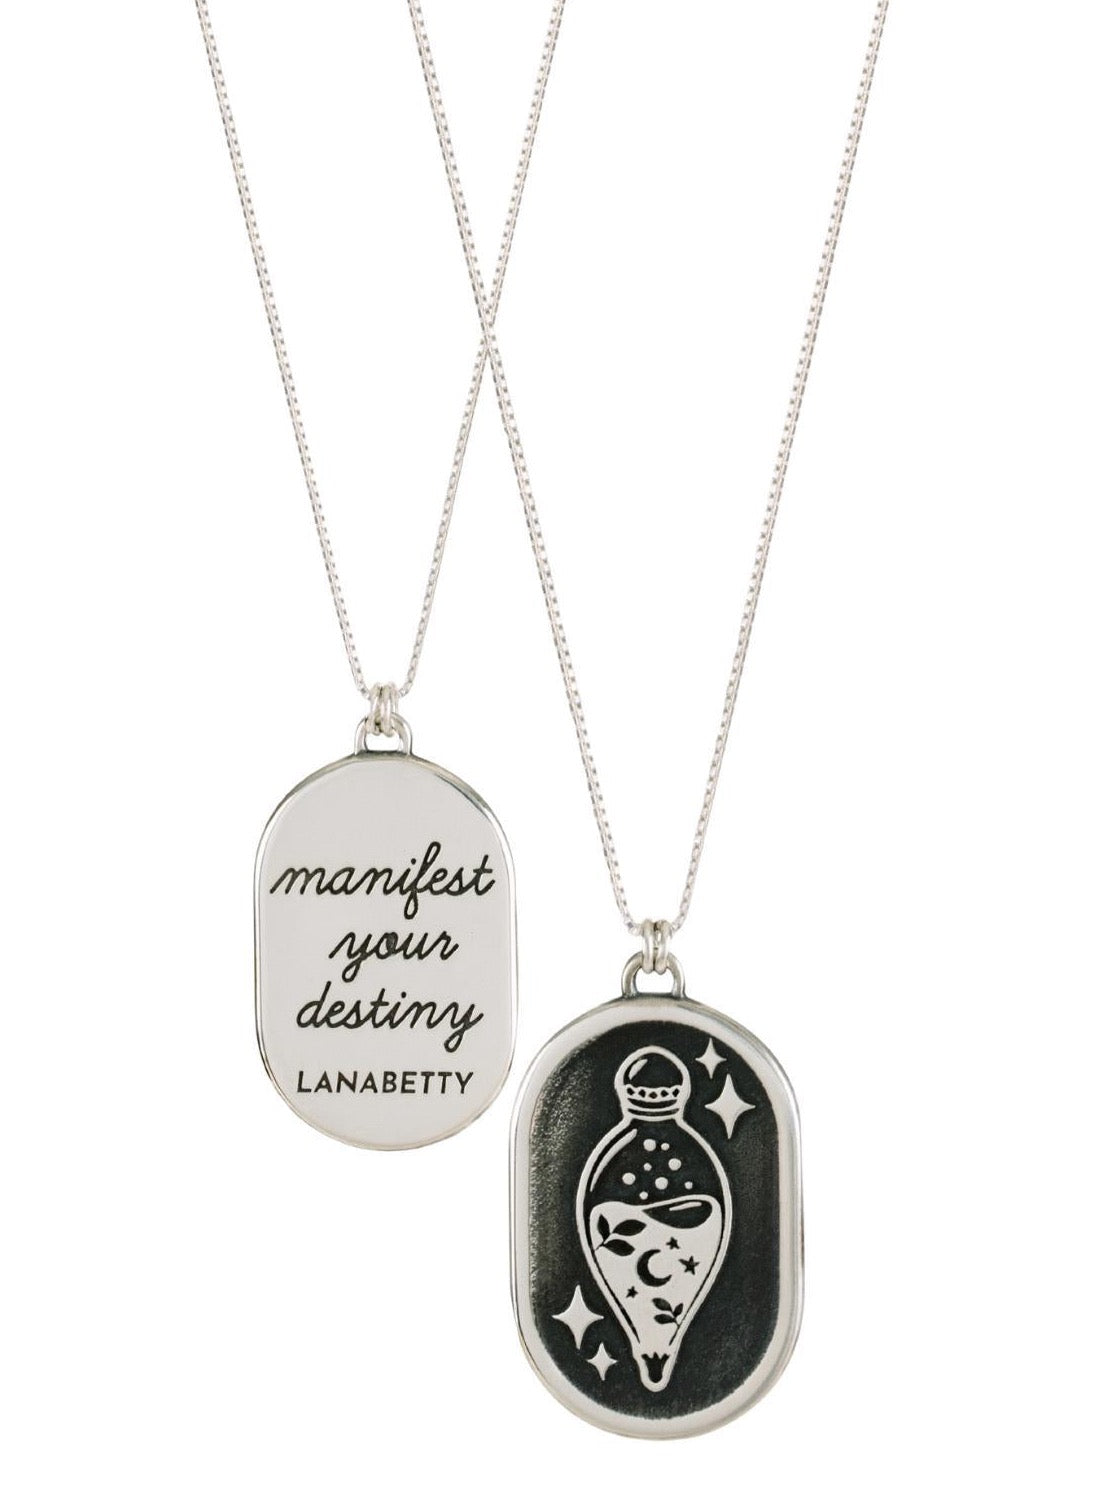 Manifest Your Destiny Sterling Silver Mantra Necklace with 24” chain by Lanabetty